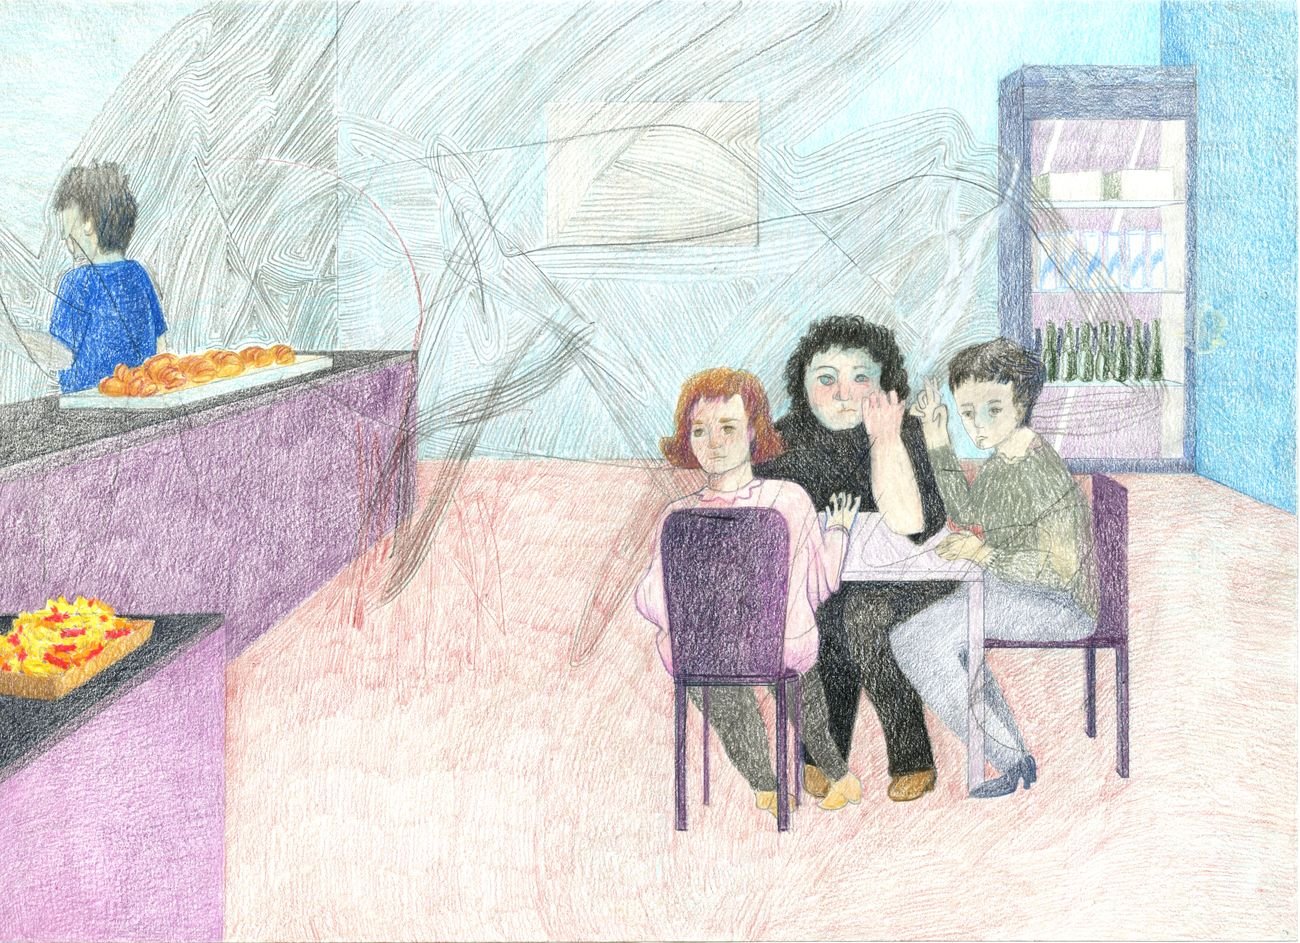 Alessandra Giacinti, Unattended child, 2018, colouring pencil on paper, 24 x 33 cm